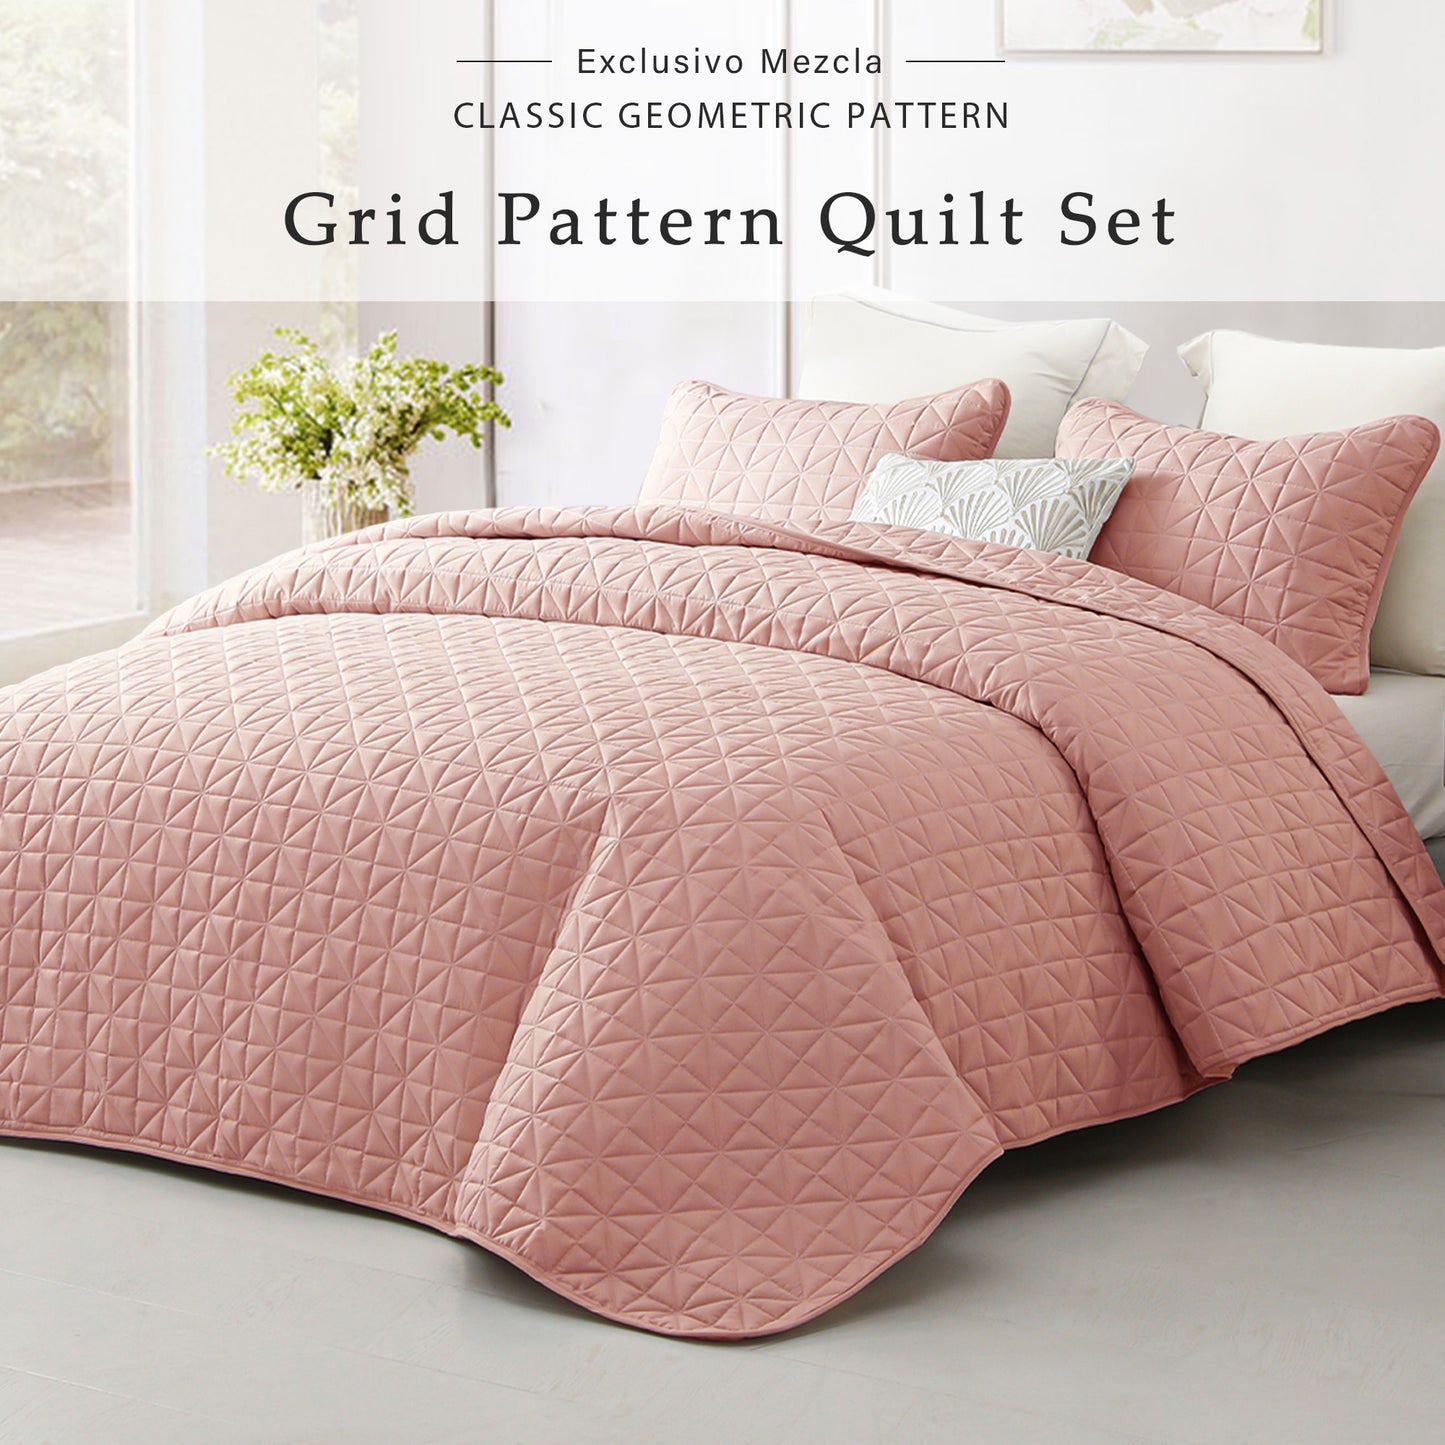 Exclusivo Mezcla Twin Quilt Bedding Set for All Seasons, Lightweight Soft Pink Quilts Twin Size Bedspreads Coverlets Bed Cover with Geometric Stitched Pattern, (1 Quilt, 1 Pillow Sham)